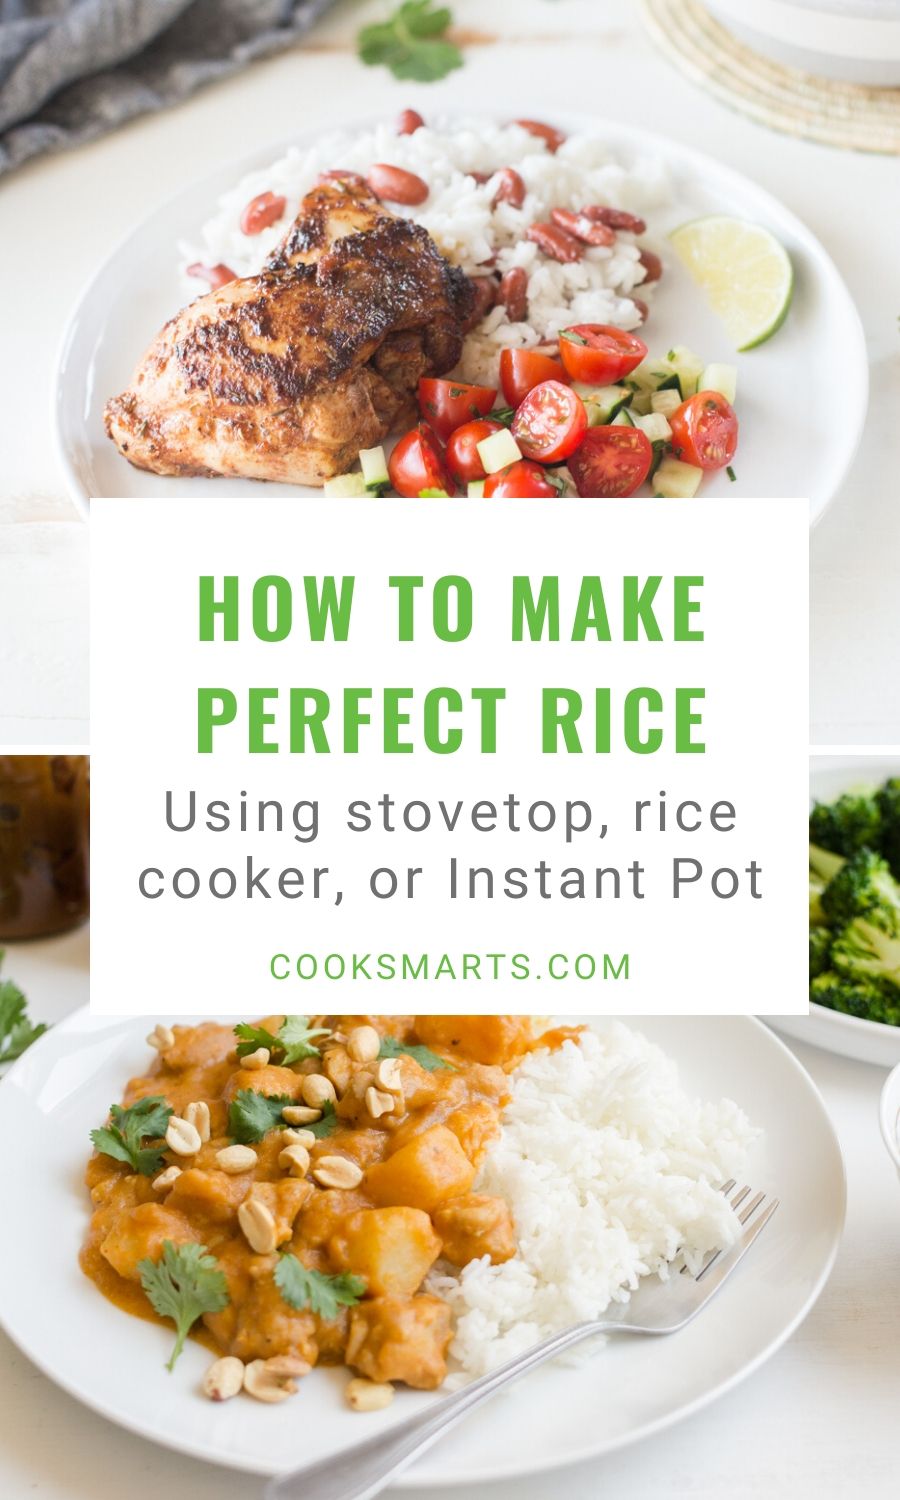 How to Cook Rice | Cook Smarts